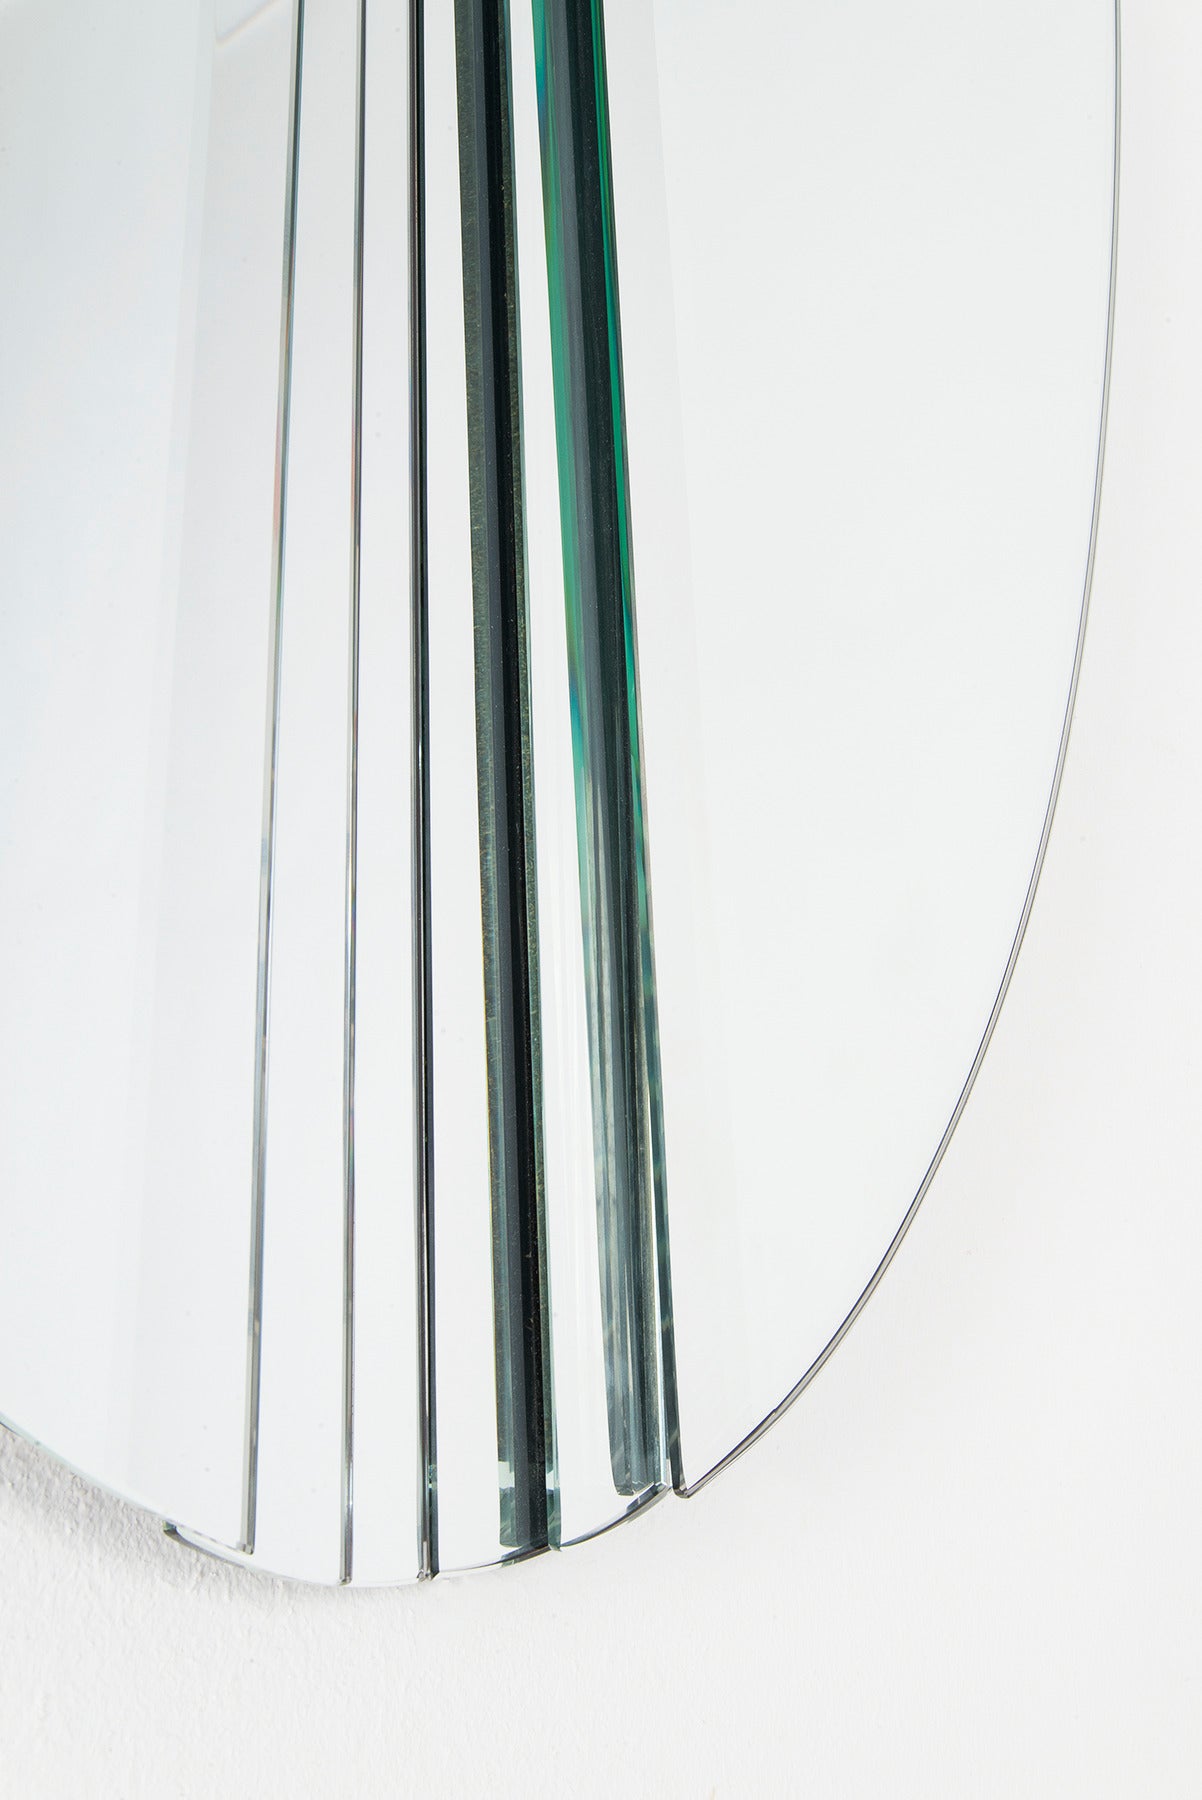 Large and decorative mirror manufactured by Gallotti & Radice in the 1970s. Black lacquered metal support, three layers of mirrored glass sheets.